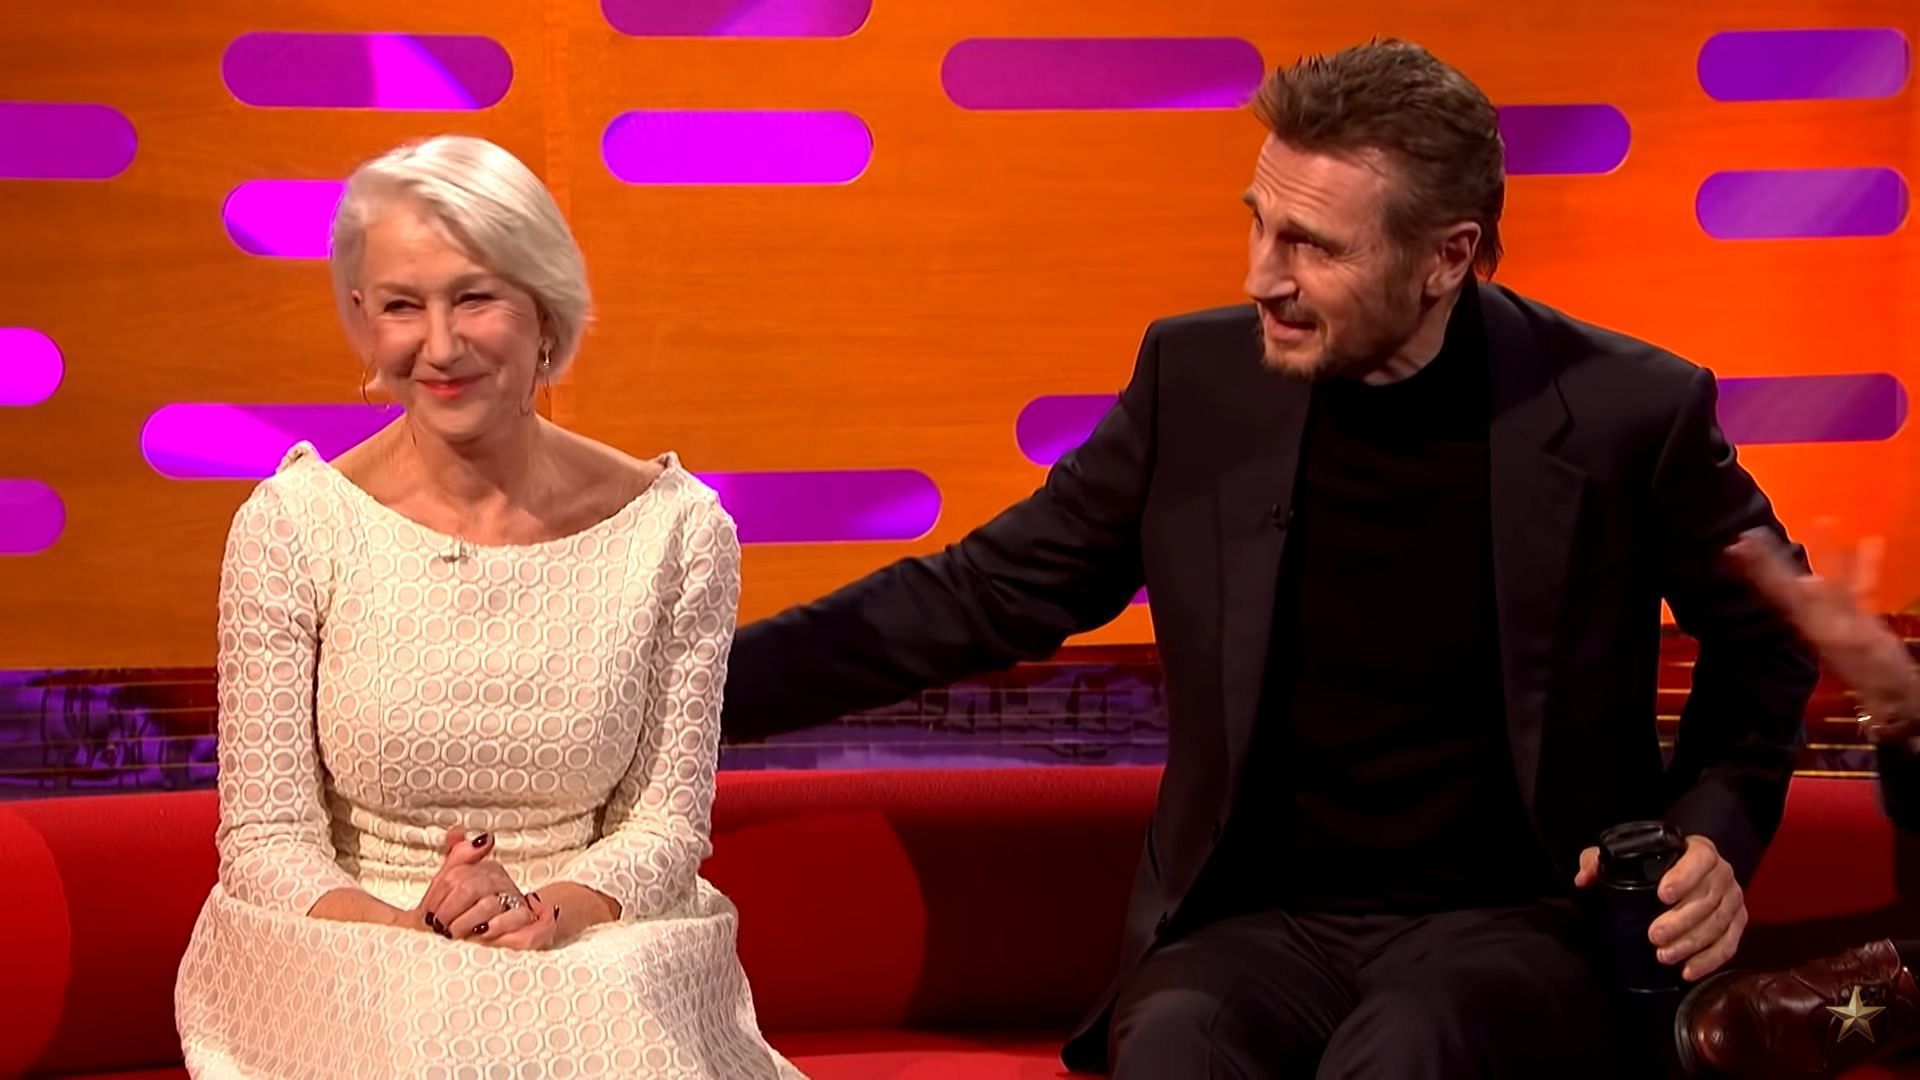 Liam Neeson was smitten with Helen Mirren during first meeting on Excalibur set (Image via The Graham Norton Show/Youtube).